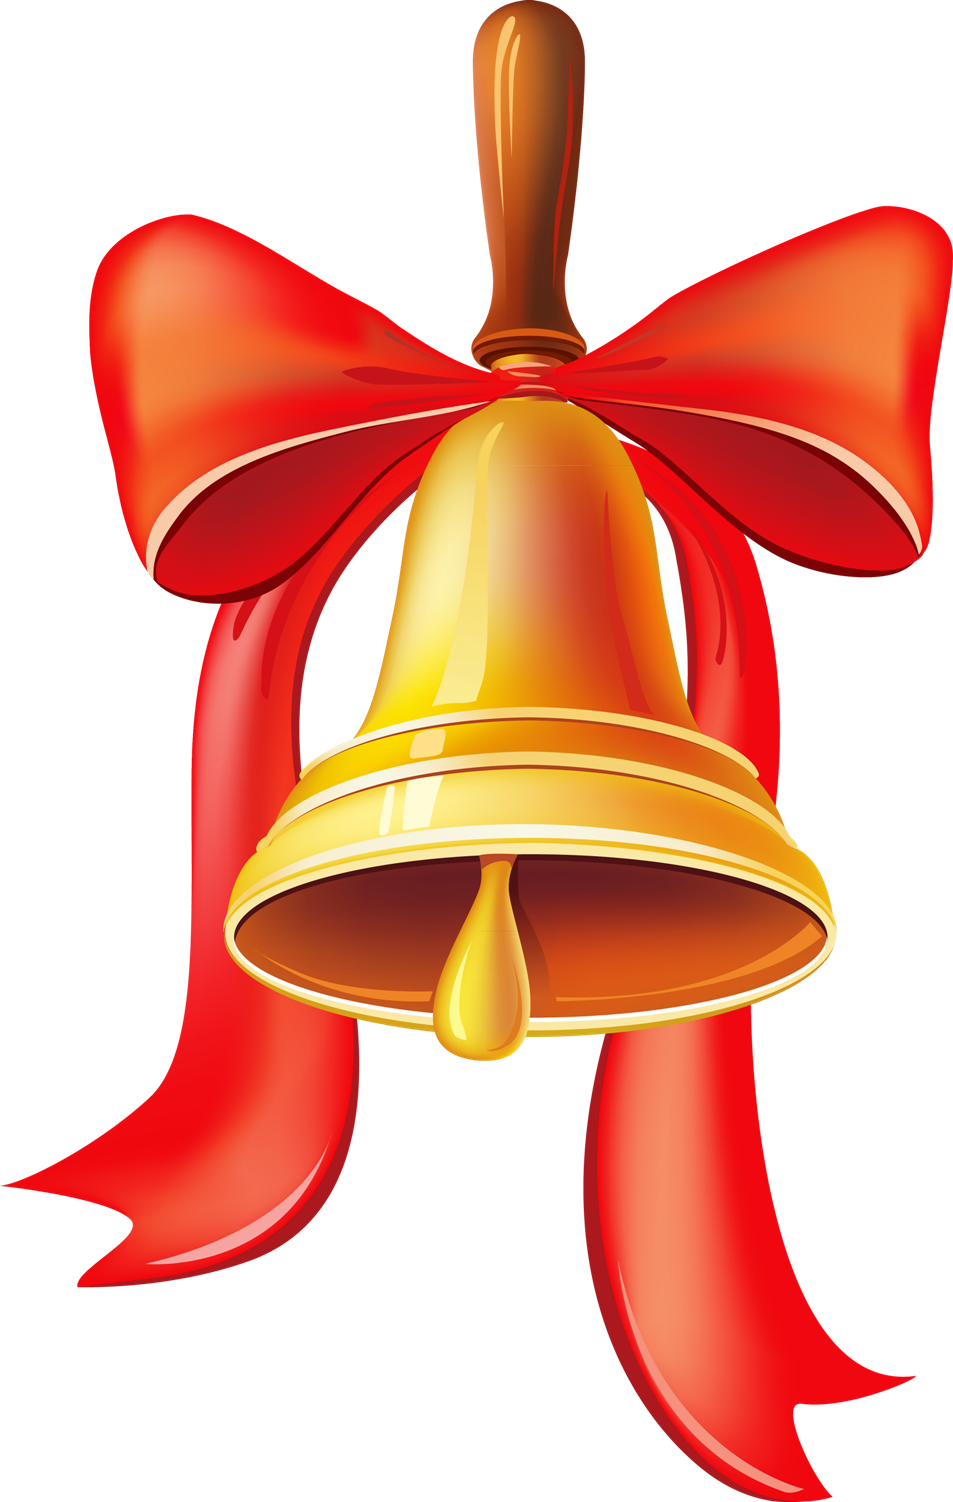 Christmas Bell with Big Ribbons PNG Image